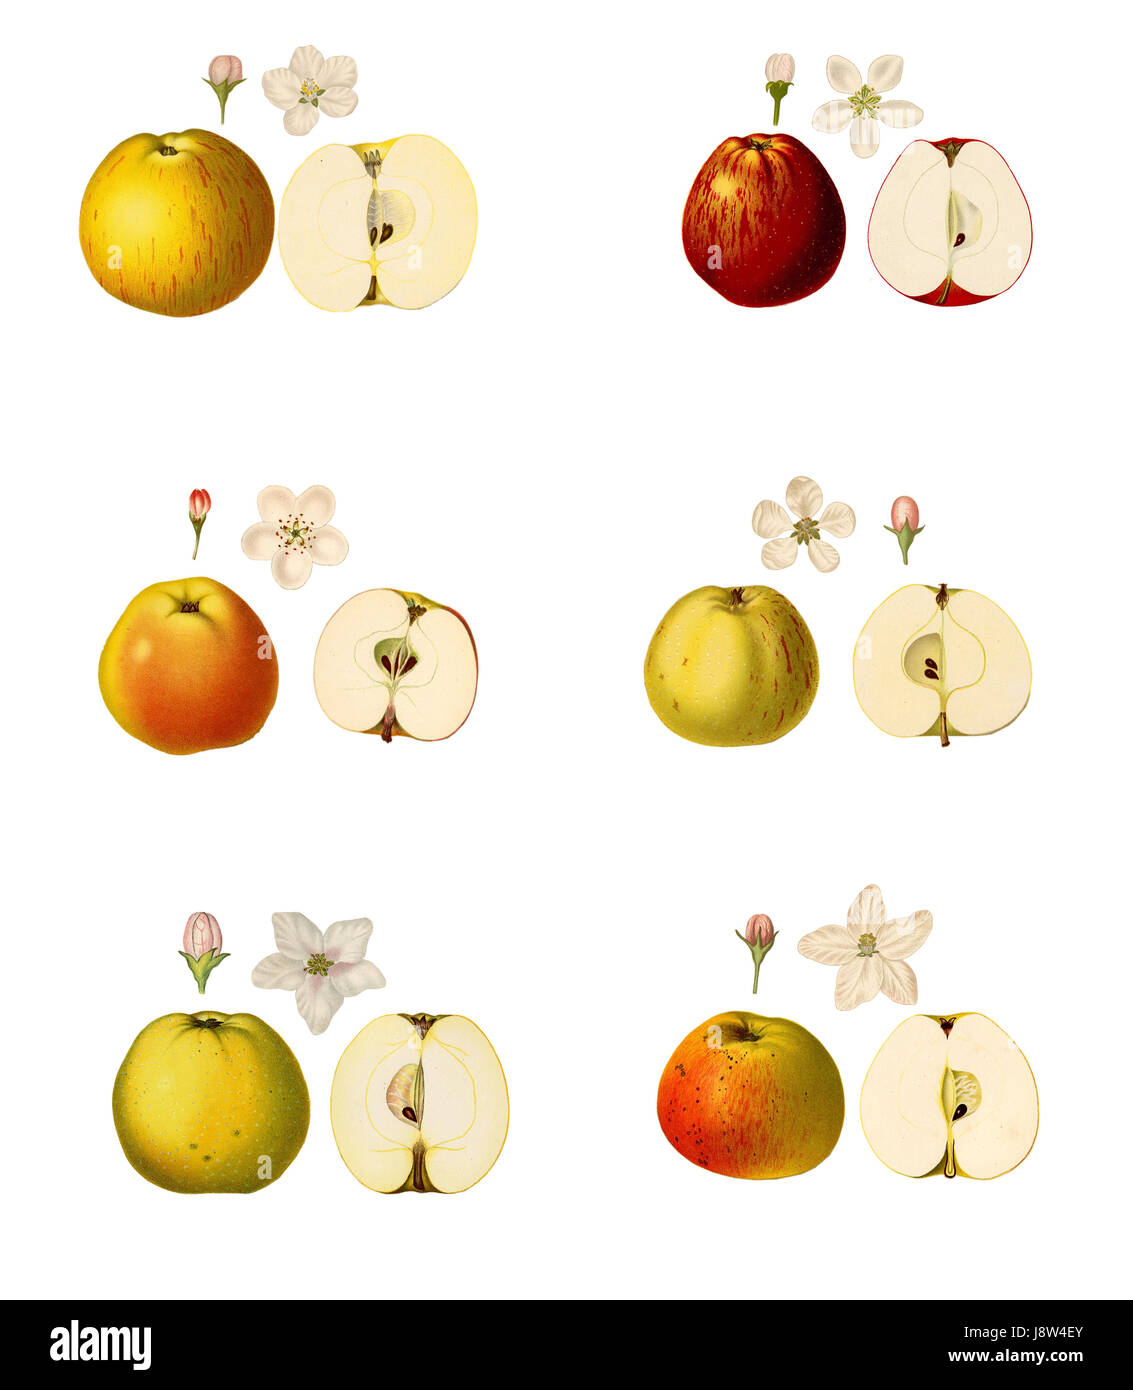 historical, illustration, apples, apple, collage, table, old, historical, Stock Photo